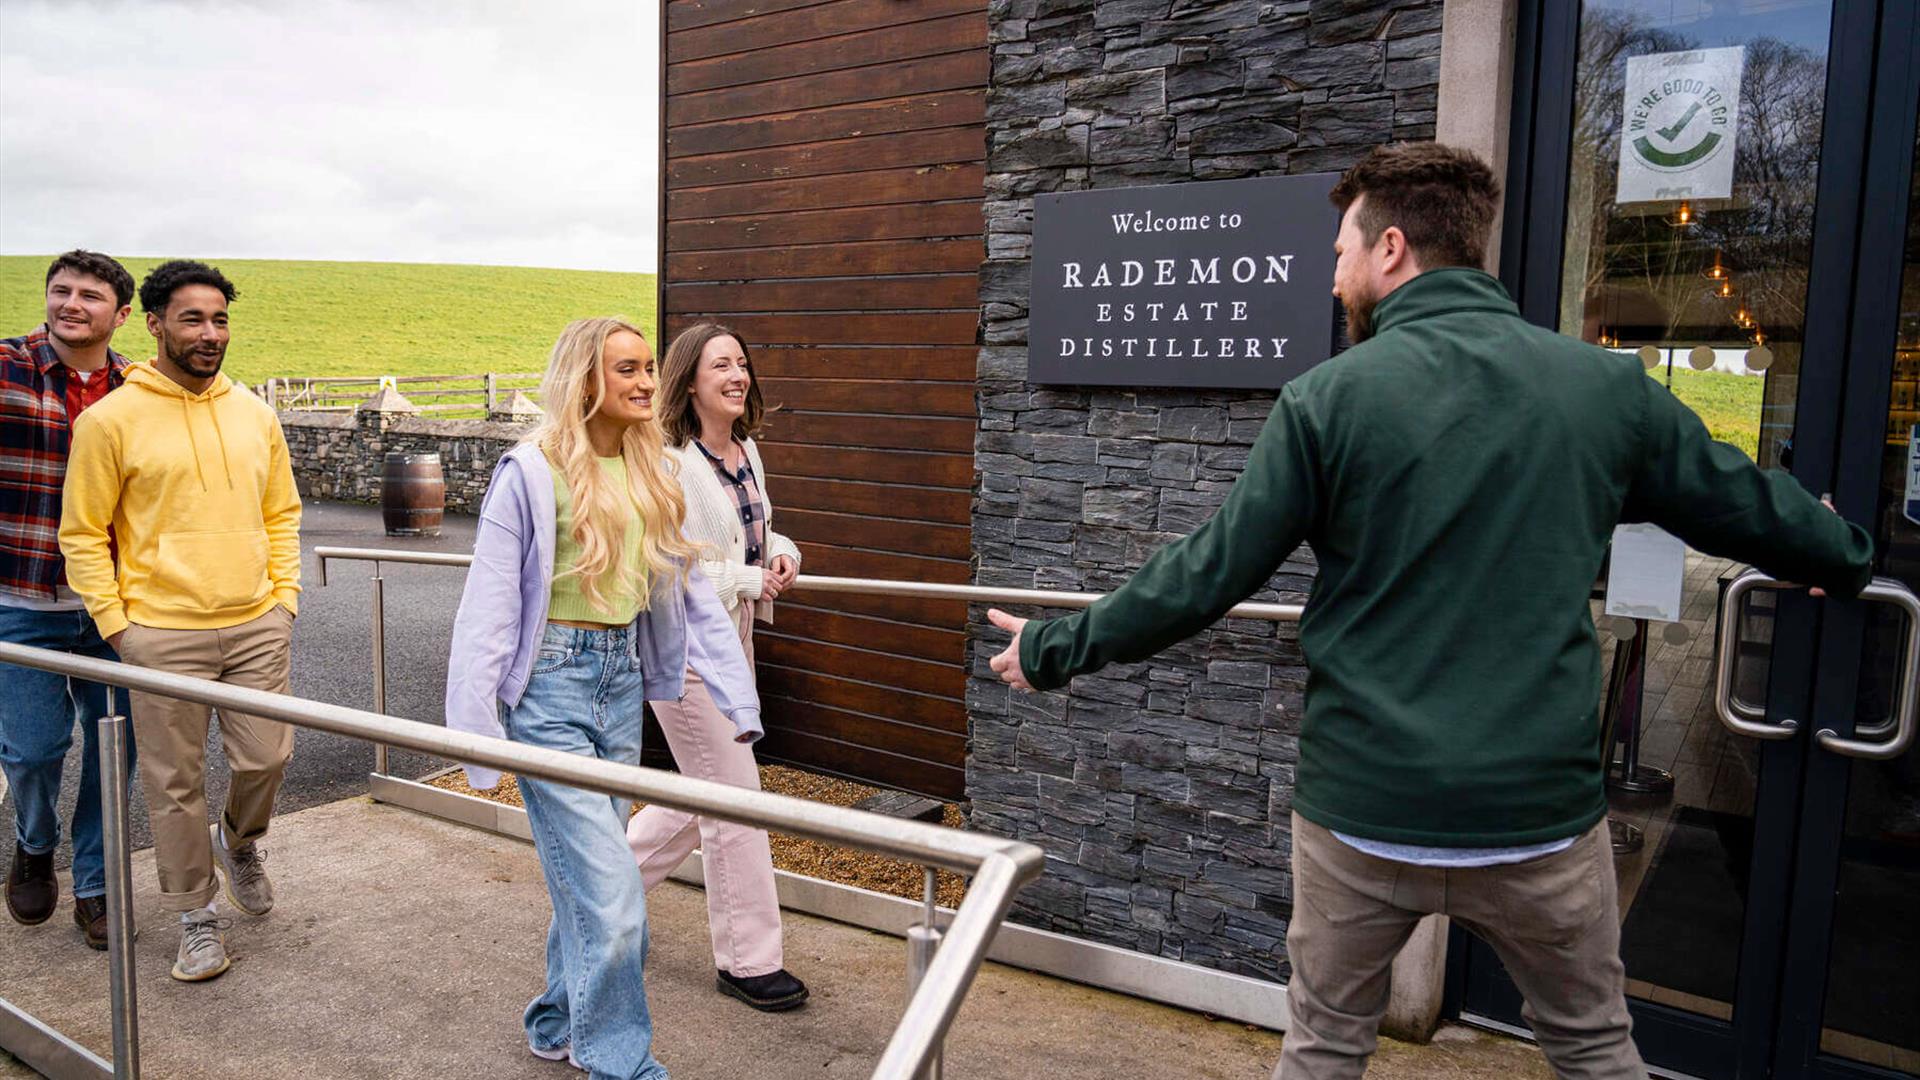 Group arrives at Rademon Estate Distillery and is welcomed by their guide